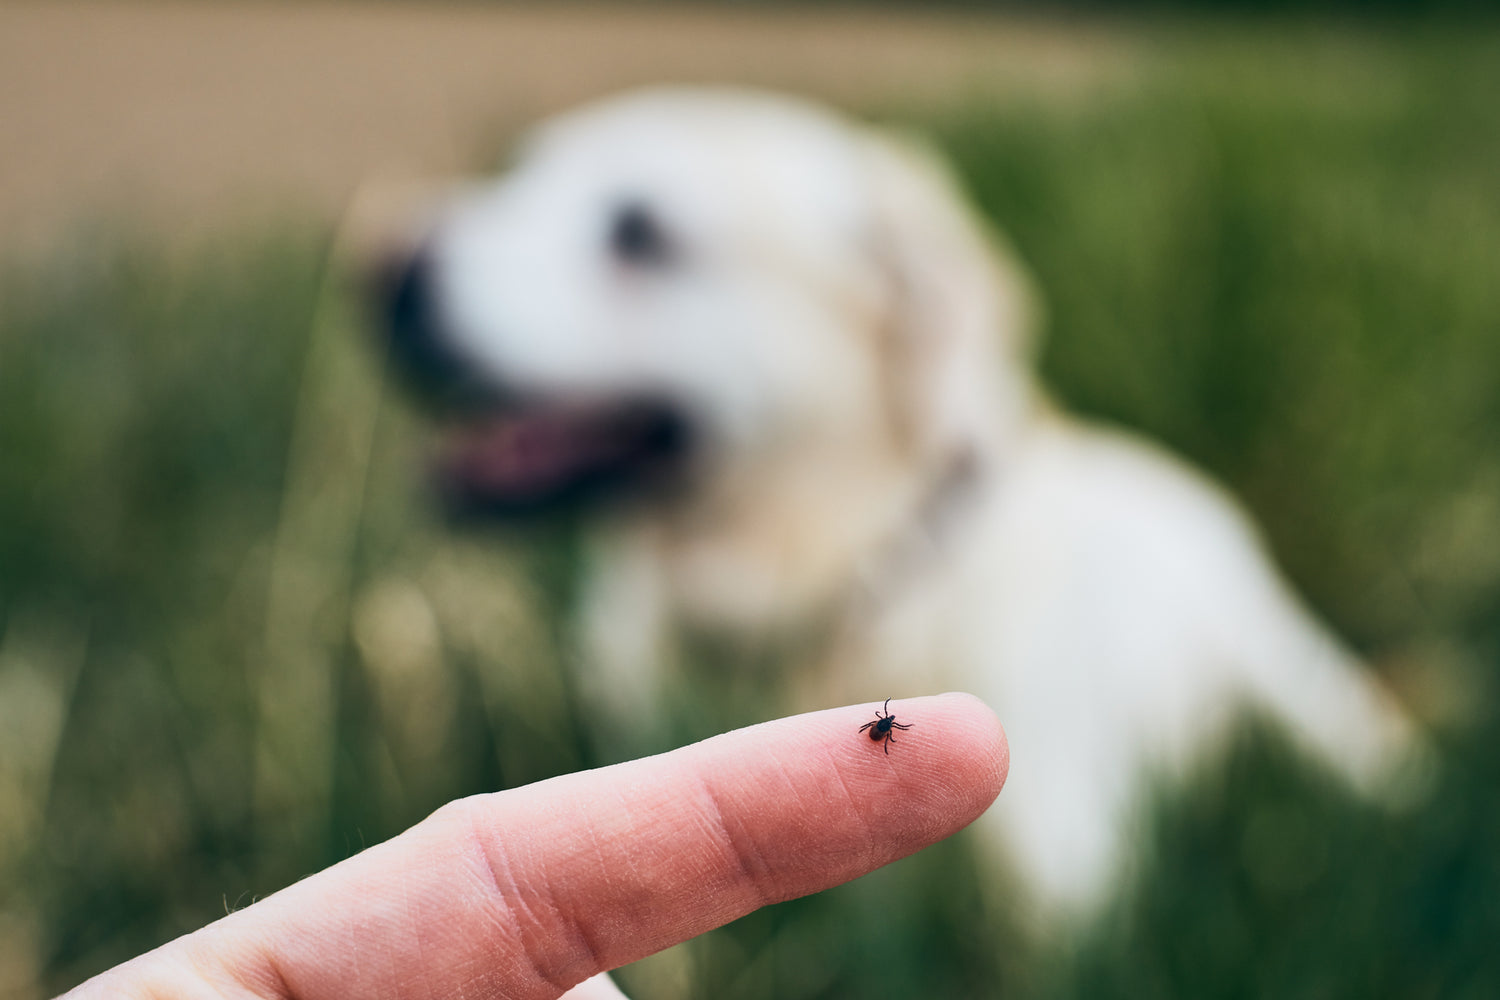 Dead Tick on Your Dog? Here's What to Do